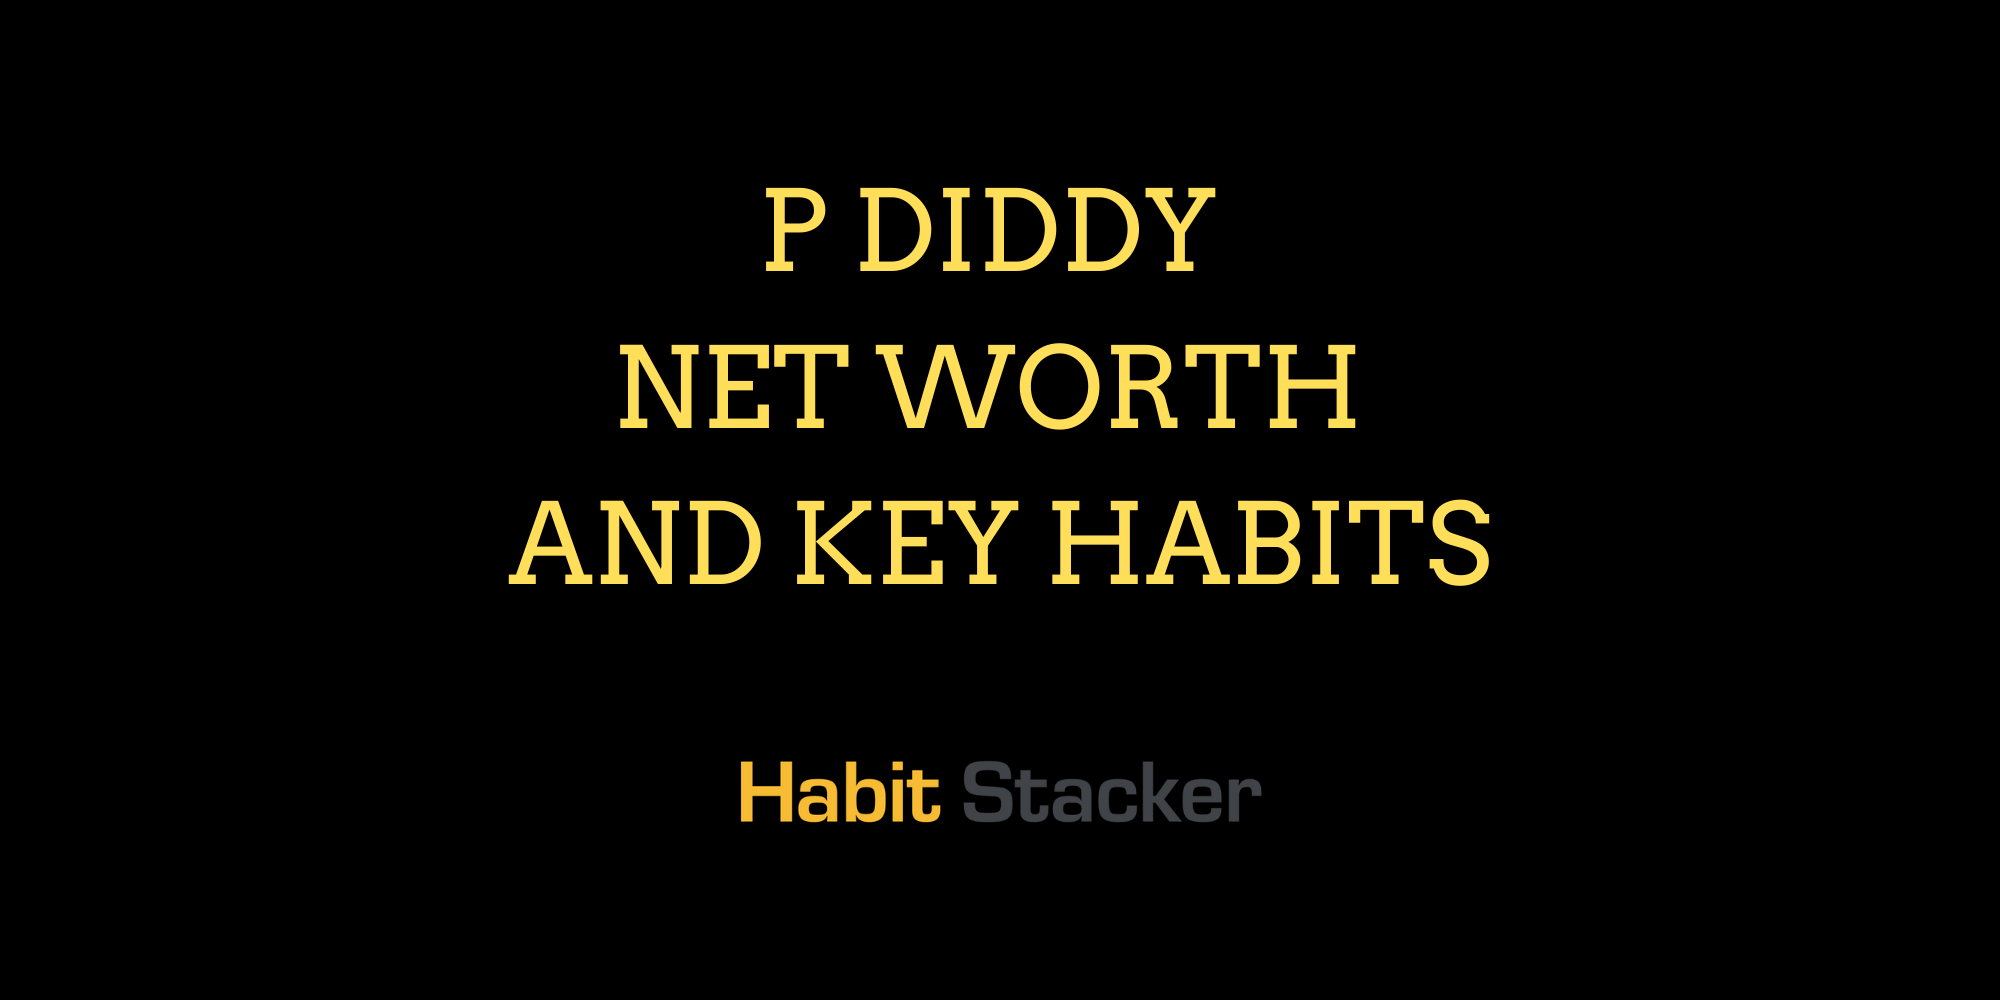 P Diddy Net Worth and Key Habits